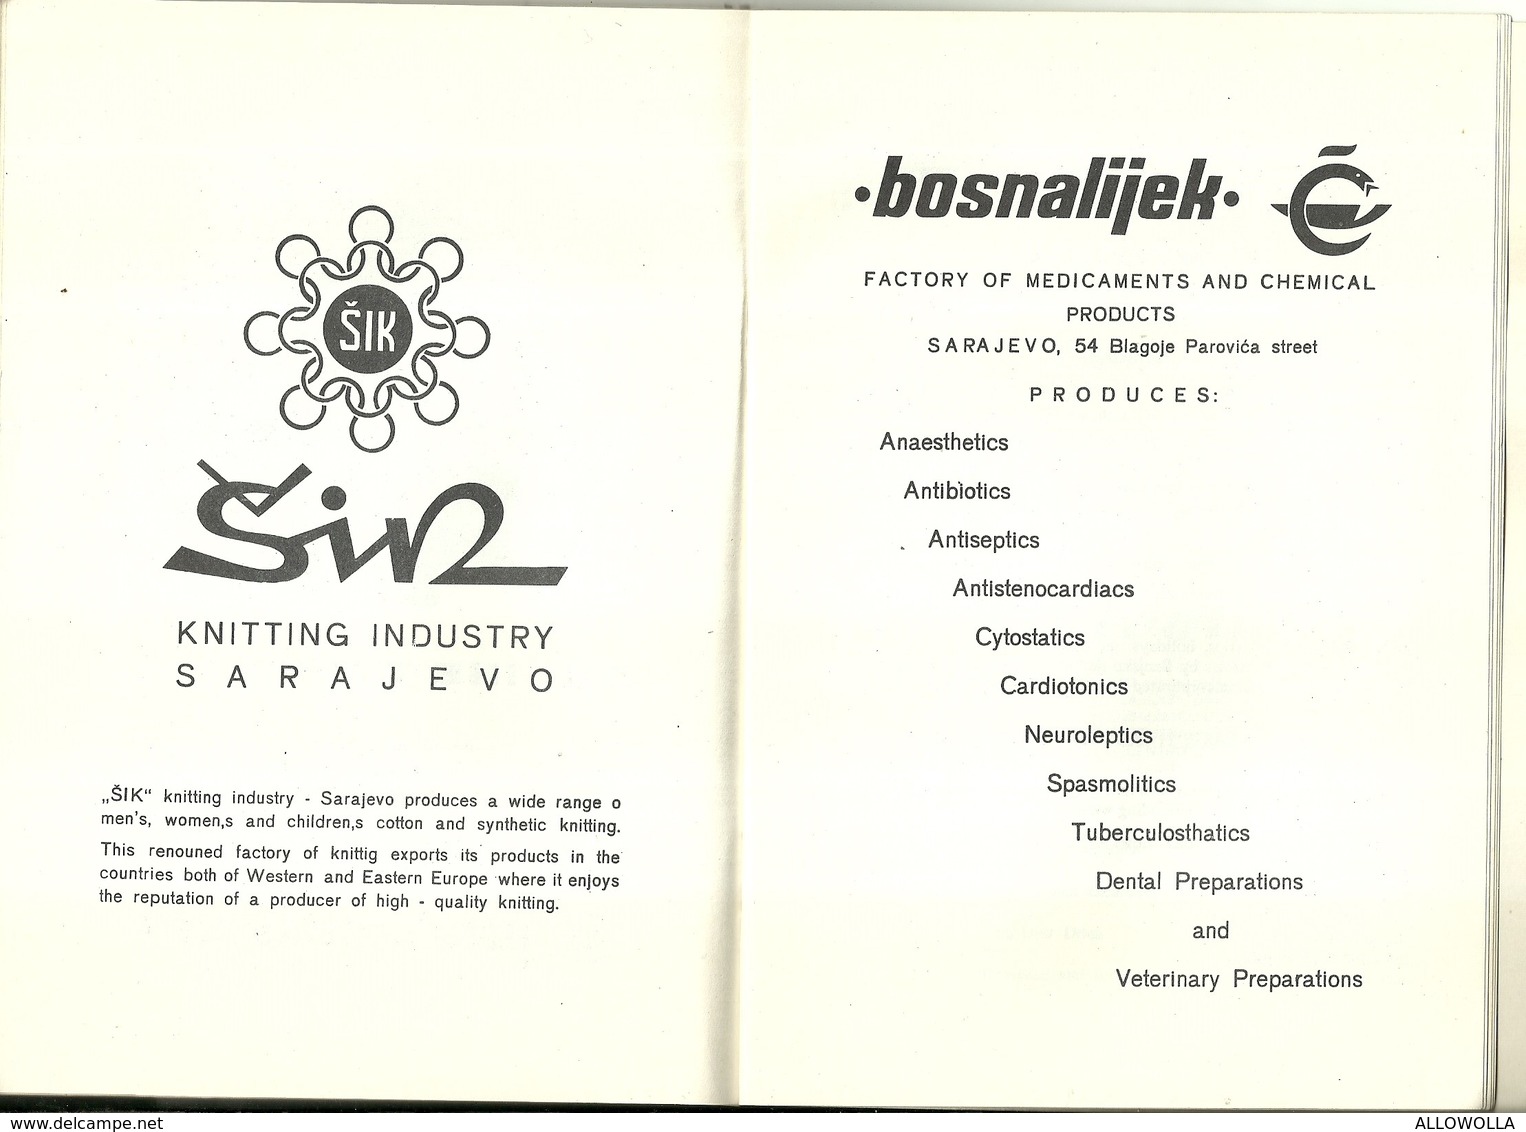 5048" THROUGH THE COLLECTIONS OF THE NATIONAL MUSEUM OF BOSNIA AND HERZEGOVINA-1971" 68 PAGINE+COPERTINE- ORIGINALE